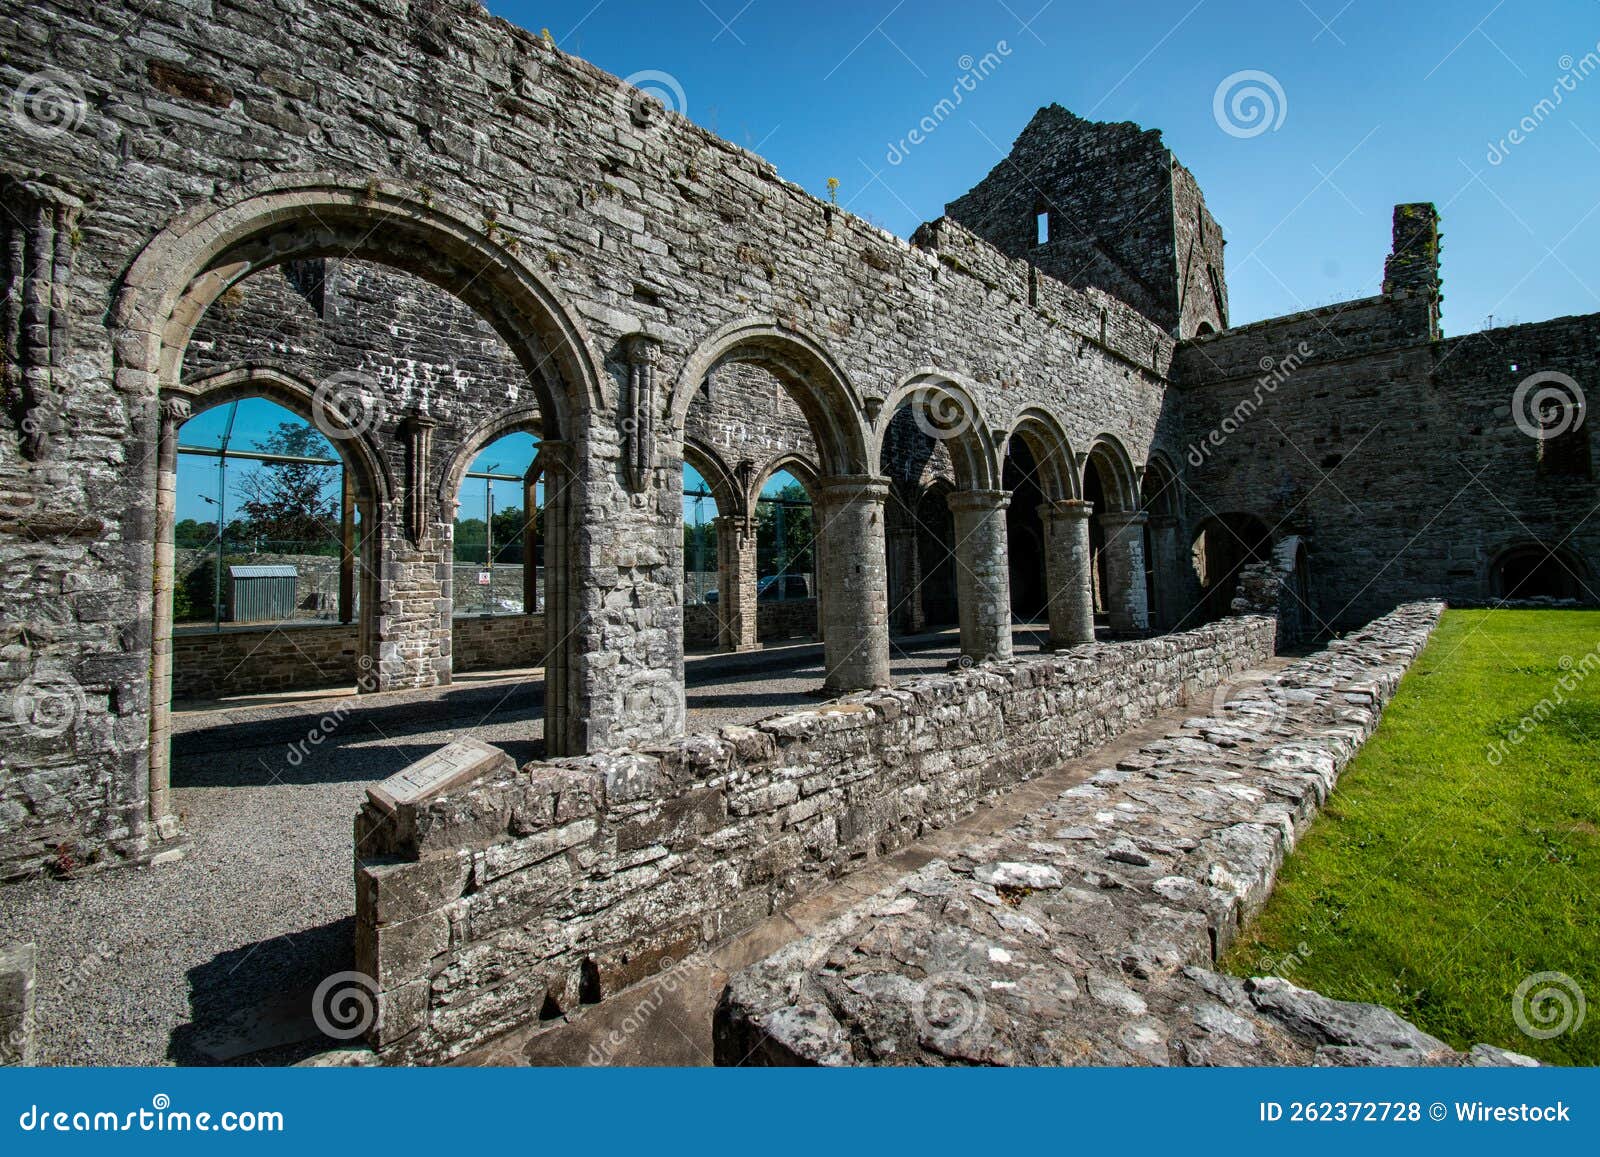 boyle abbey under the sunlight and a blue sky in ireland